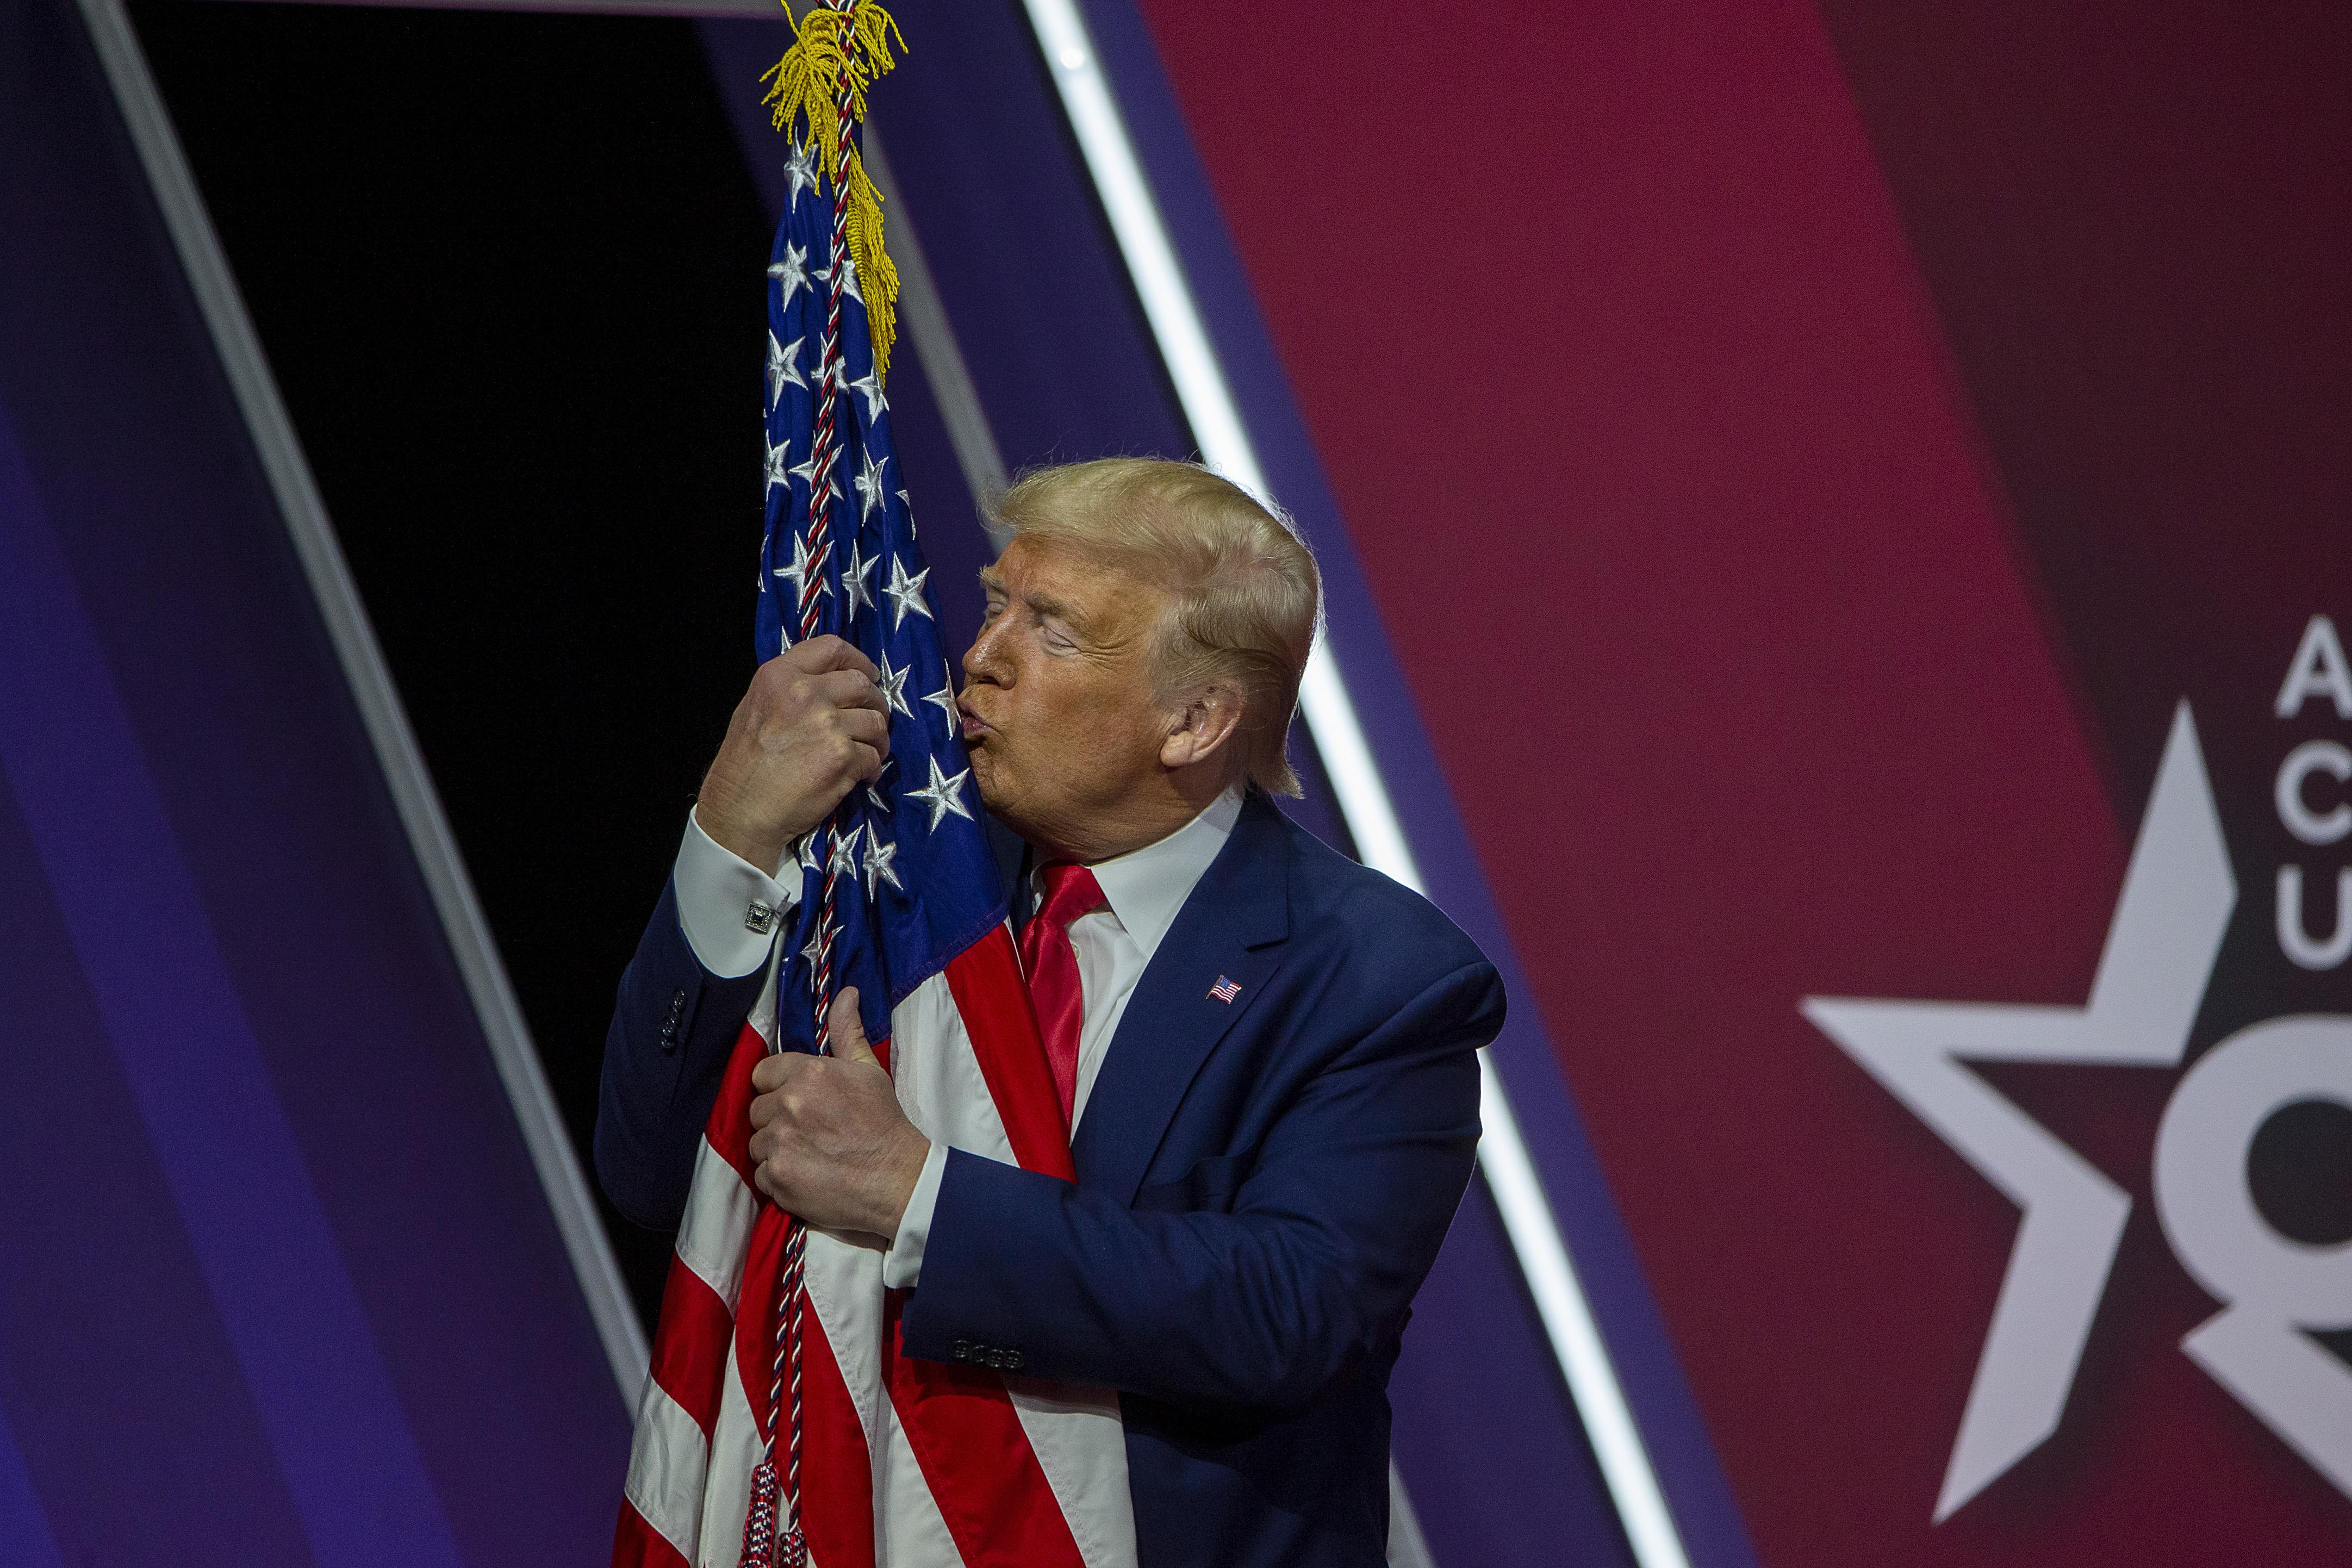 President Donald Trump kisses the flag of the United States of America at the annual Conservative Political Action Conference (CPAC) at Gaylord National Resort & Convention Center February 29, 2020 in National Harbor, Maryland.